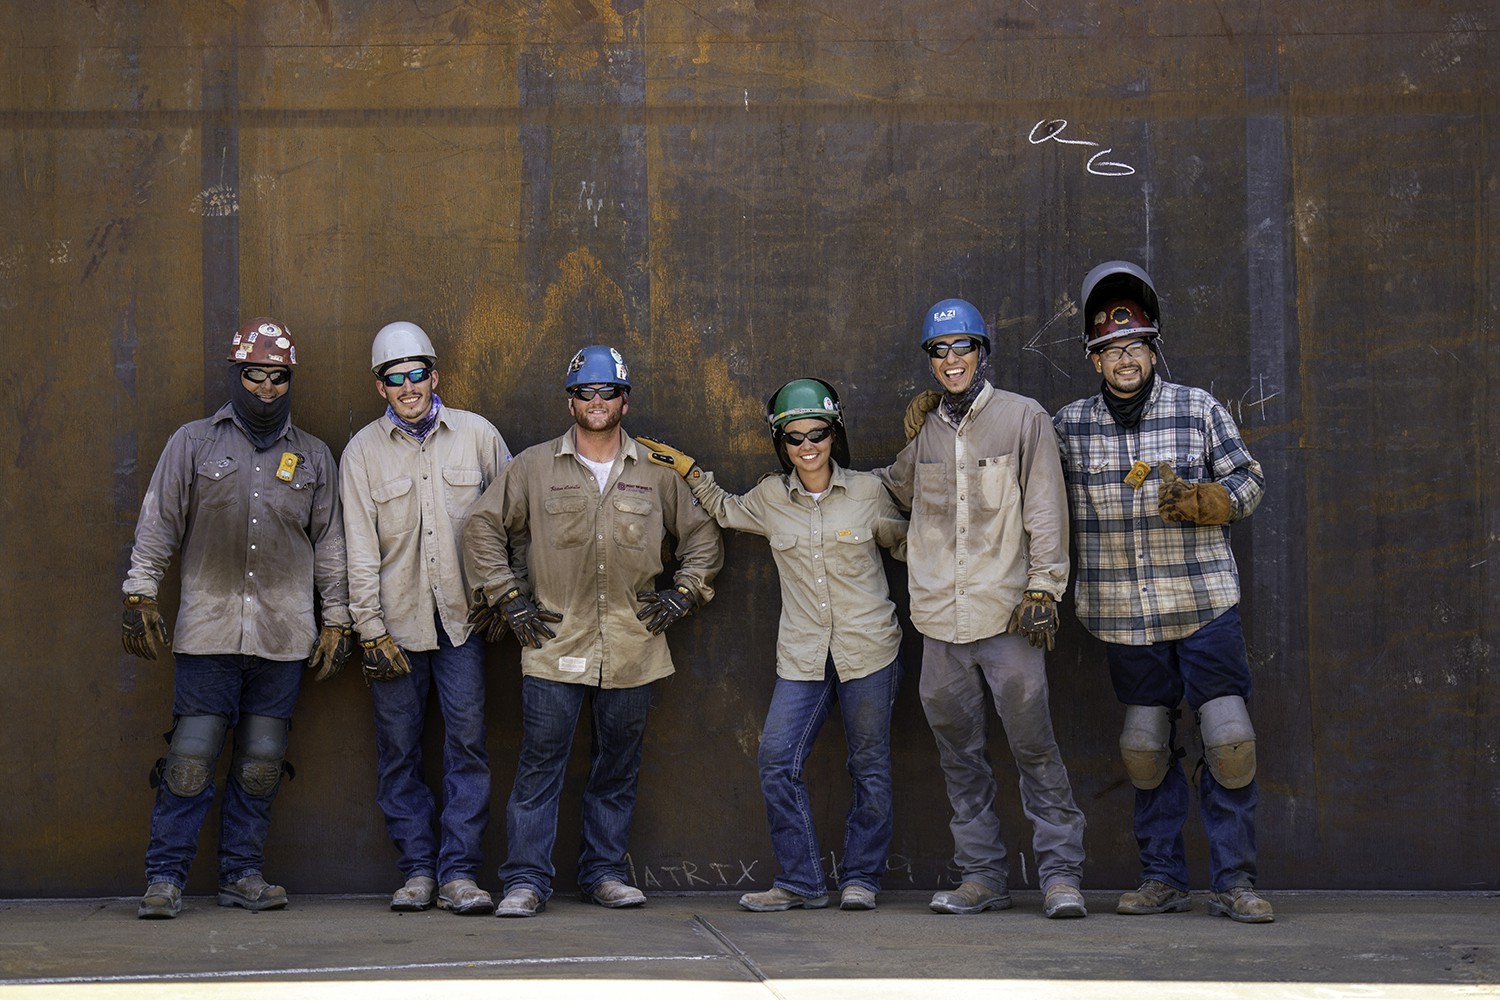 Matrix welders take a moment to pose for a group photo.